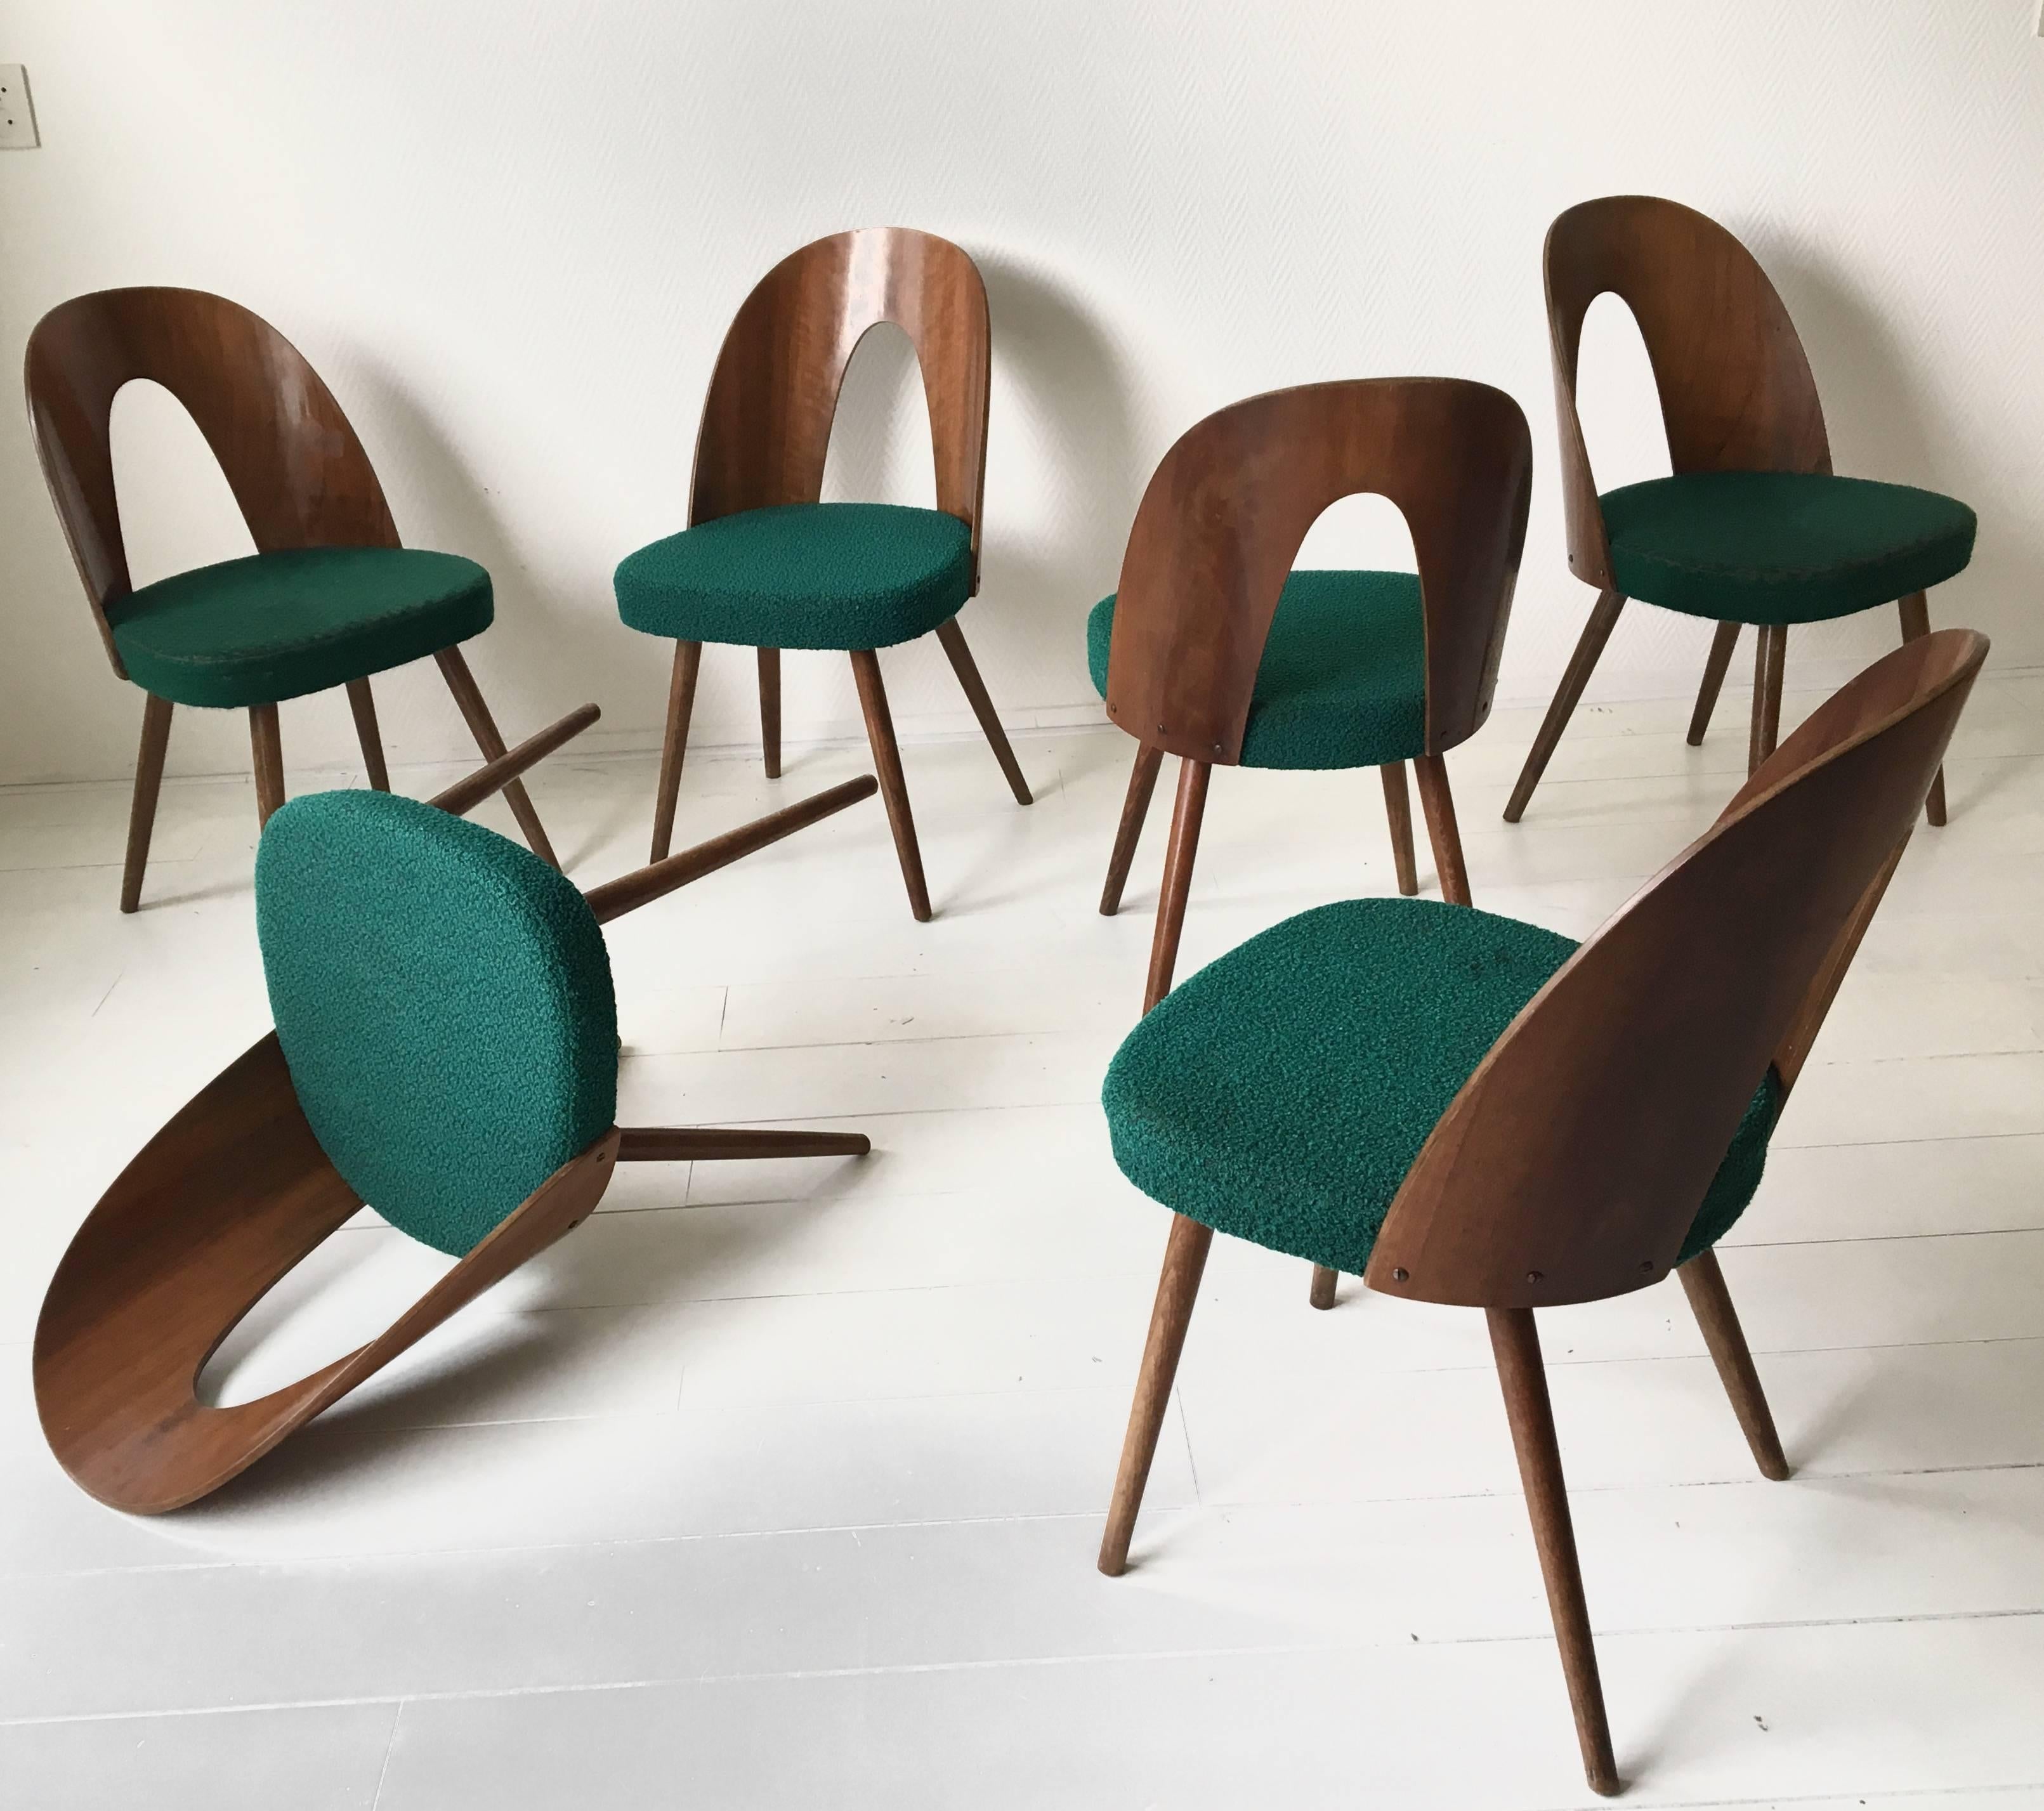 These chairs have been designed by Antonin Suman and were manufactured by Zilina. Produced in the 1960s. 

This lovely set features walnut veneered bentwood backrests and tapered legs. Their green original fabric is still in good condition and two